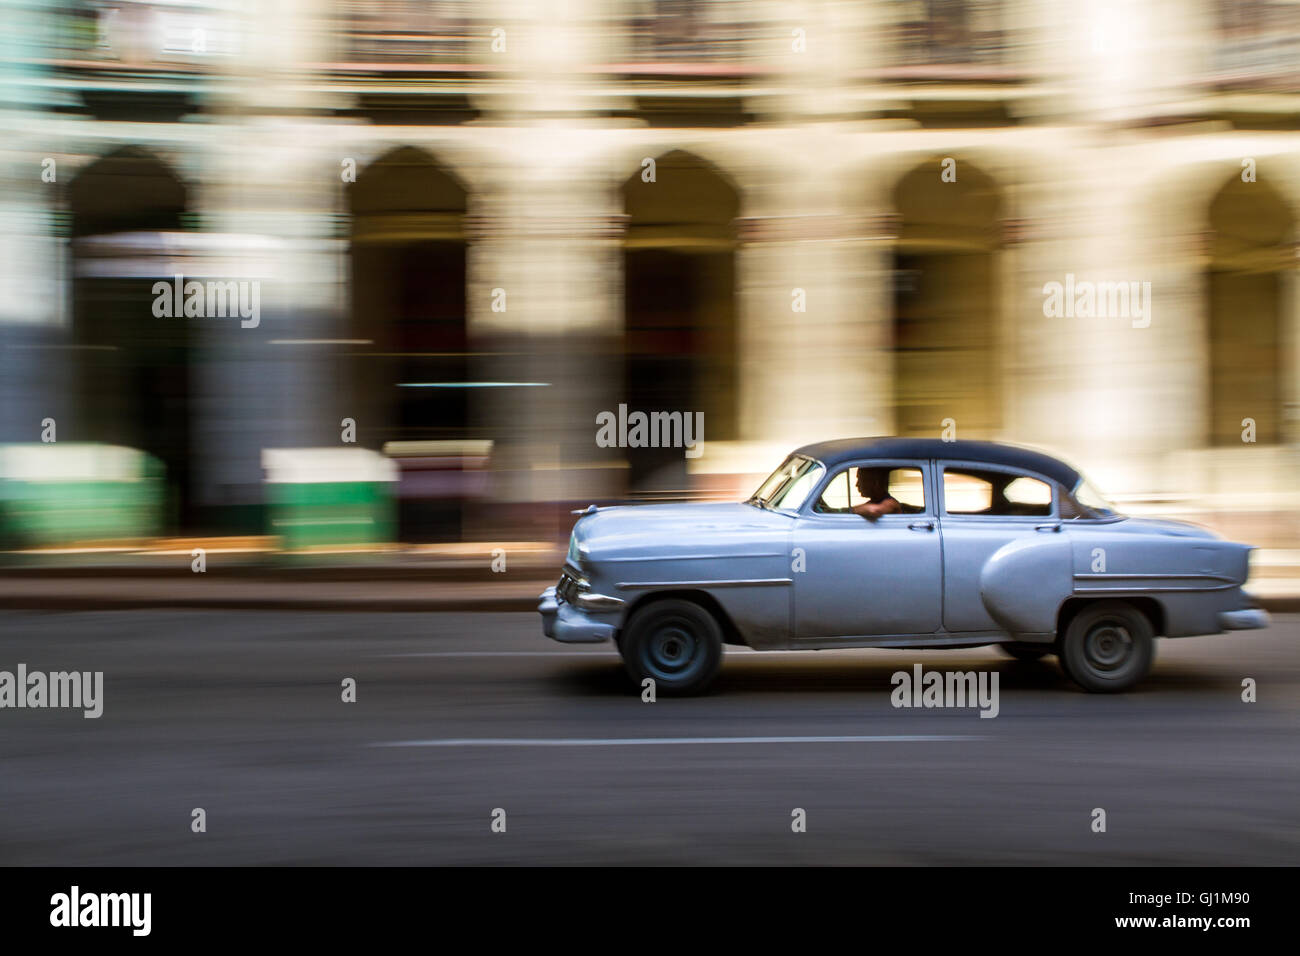 Panning shot of classic, grey, vintage American car on sunny day in colonial street, Havana, Cuba, 2013 Stock Photo